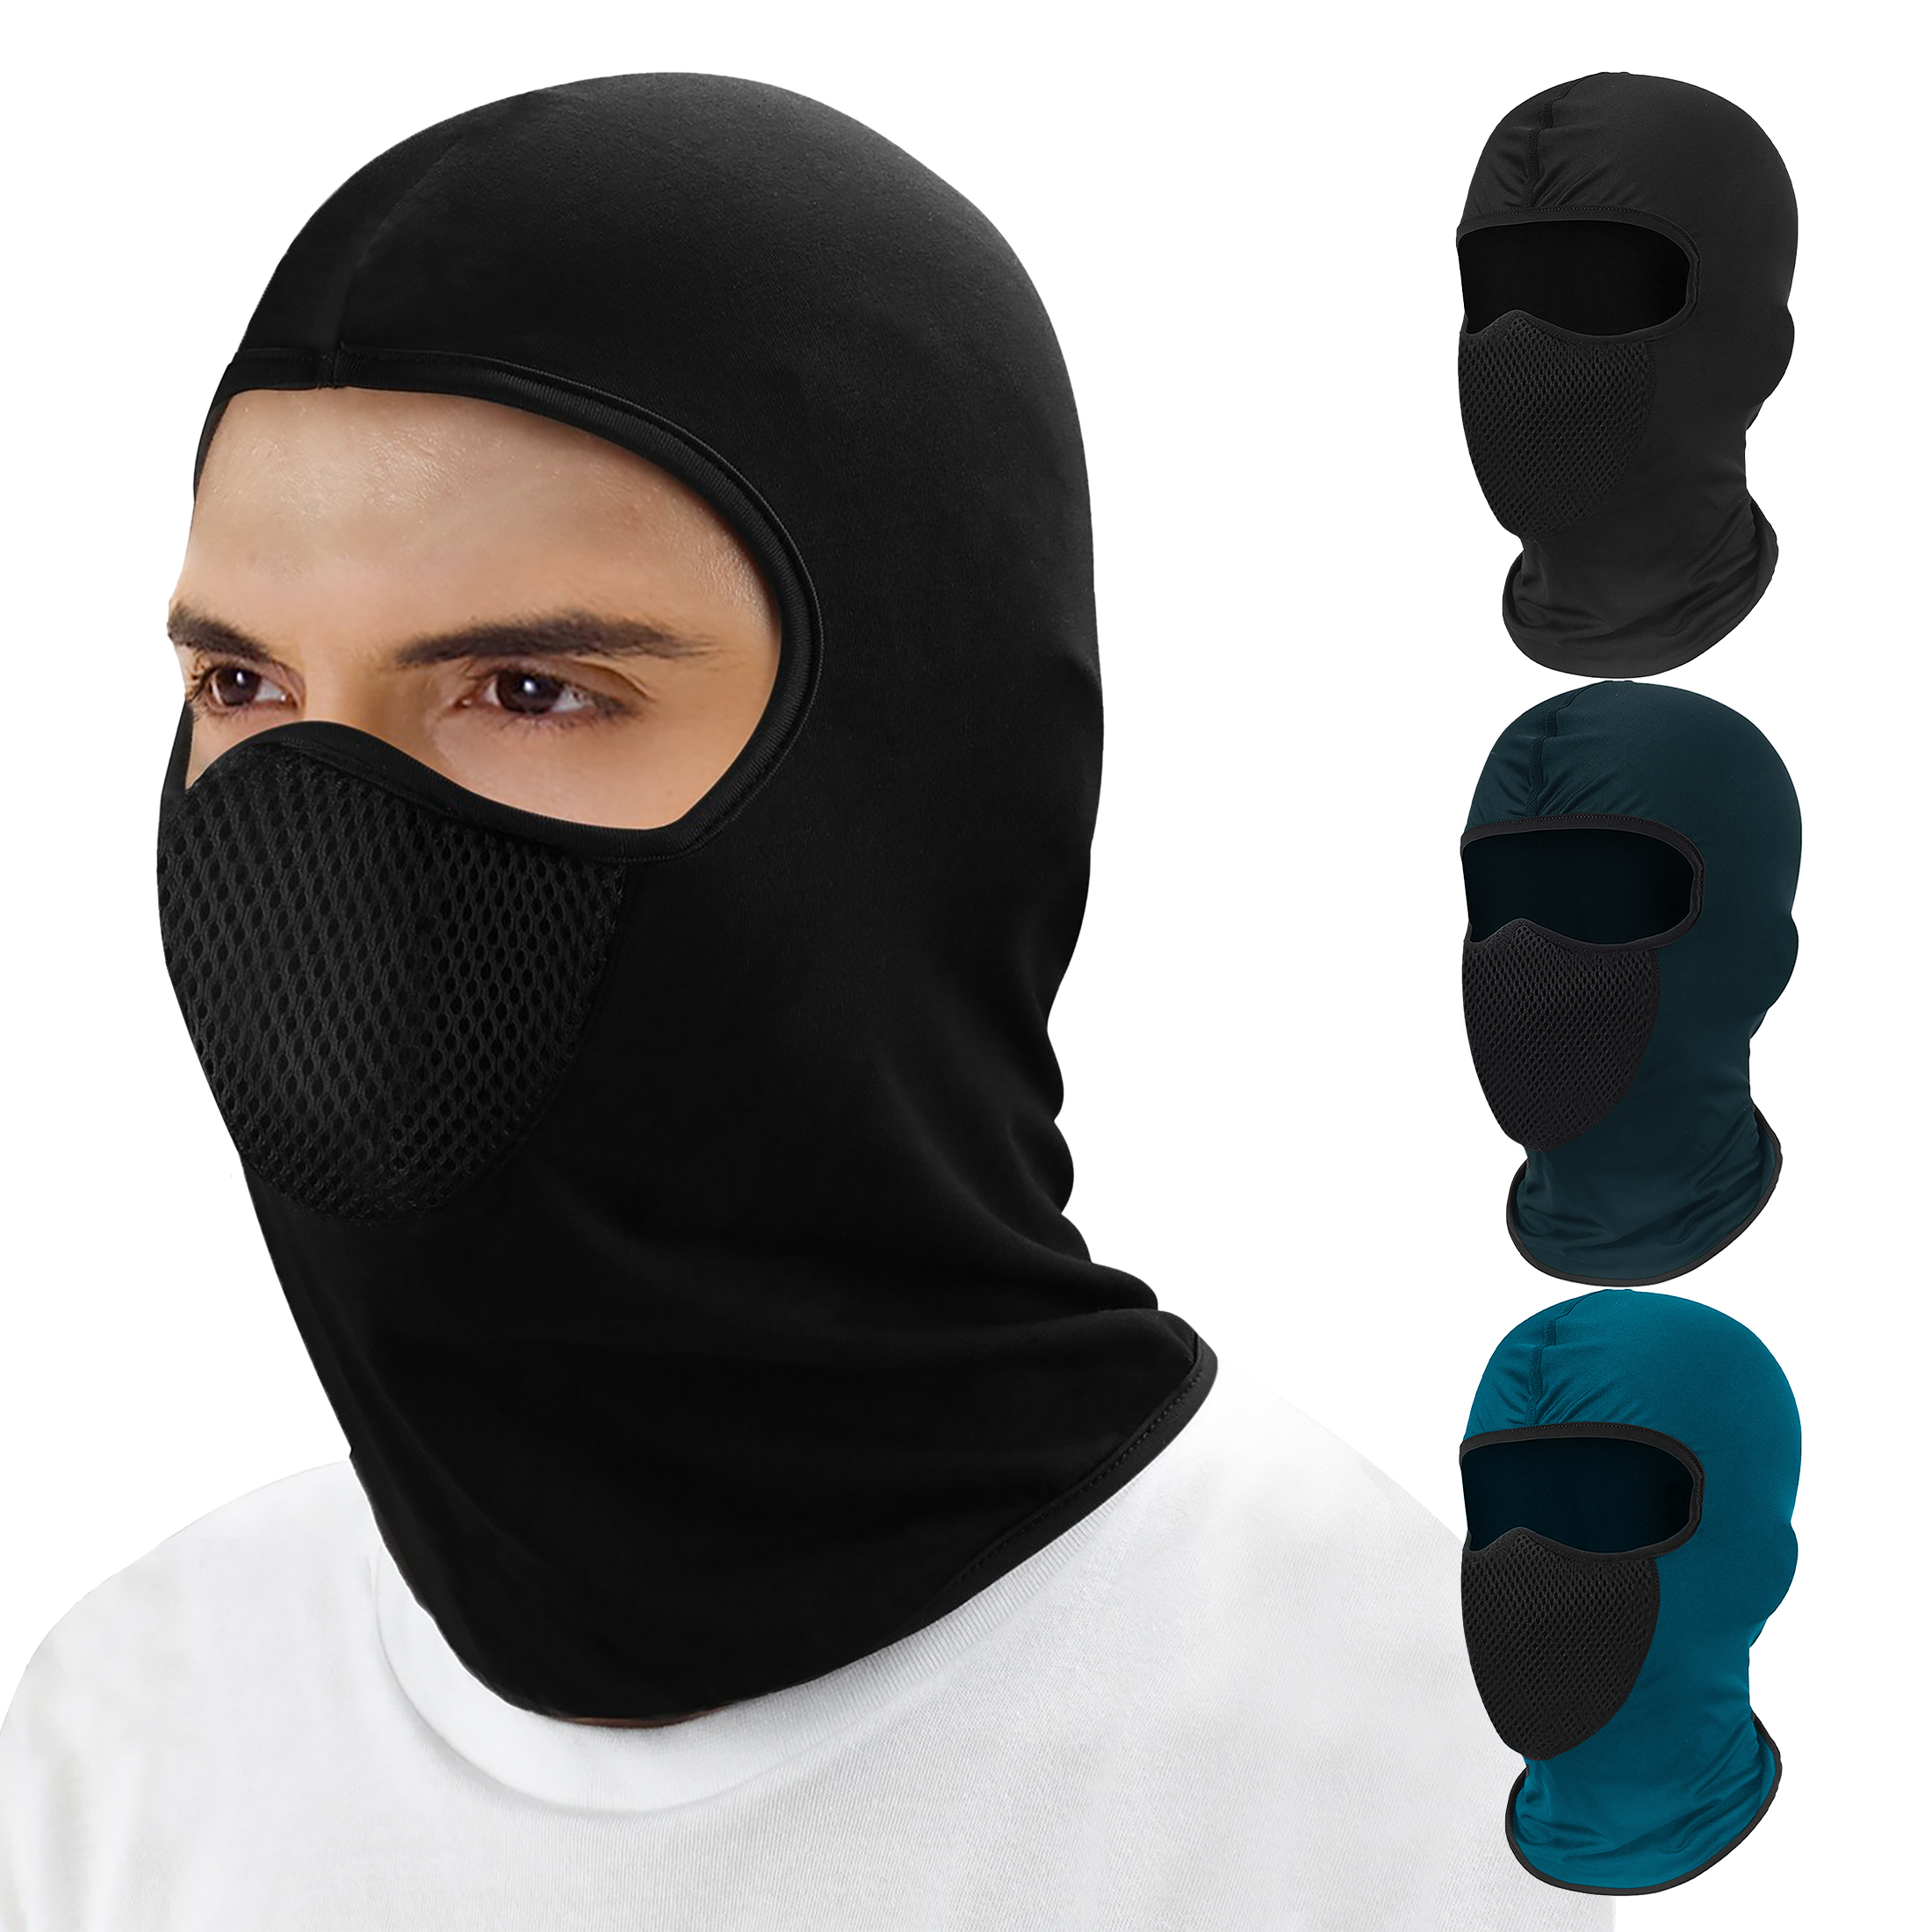 2-Pack: Men's Warm Windproof Breathable Thermal Balaclava Winter Ski Face Mask - Full Face